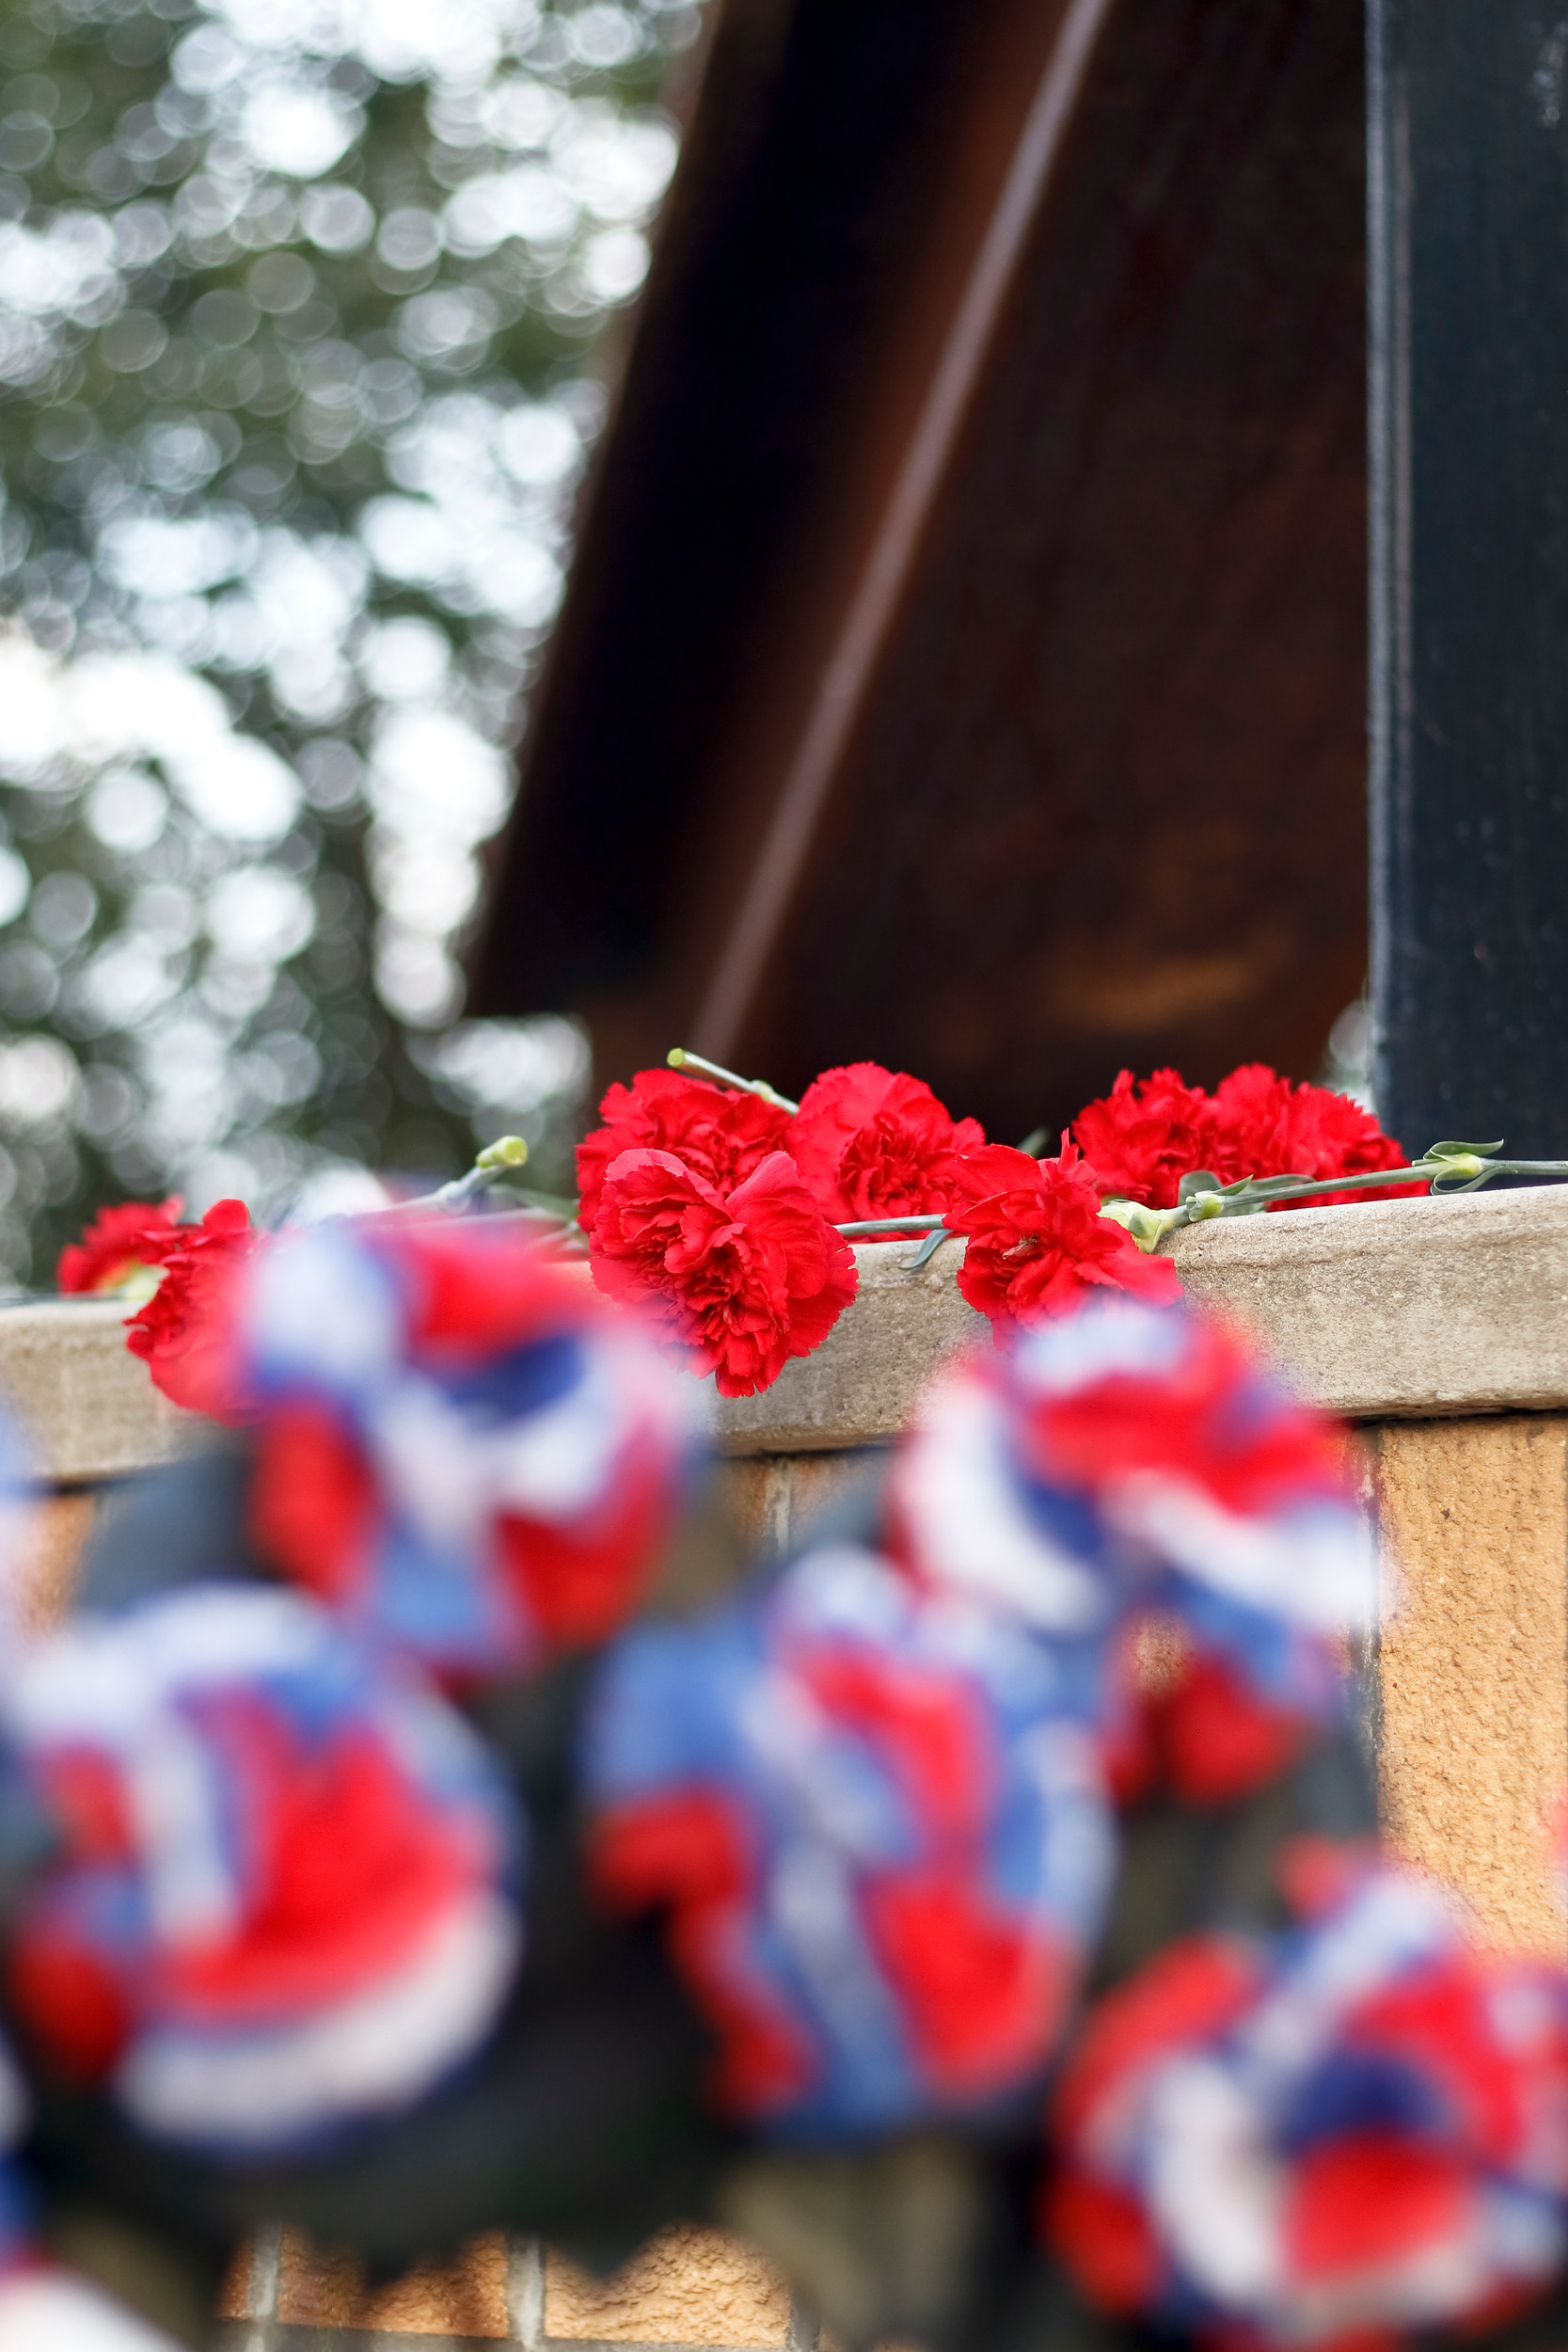 The steel beam from the World Trade Center has been in Valley Stream since 2011. Each year wreaths and flowers are placed on and around the beam during the ceremony at Hendrickson Park.